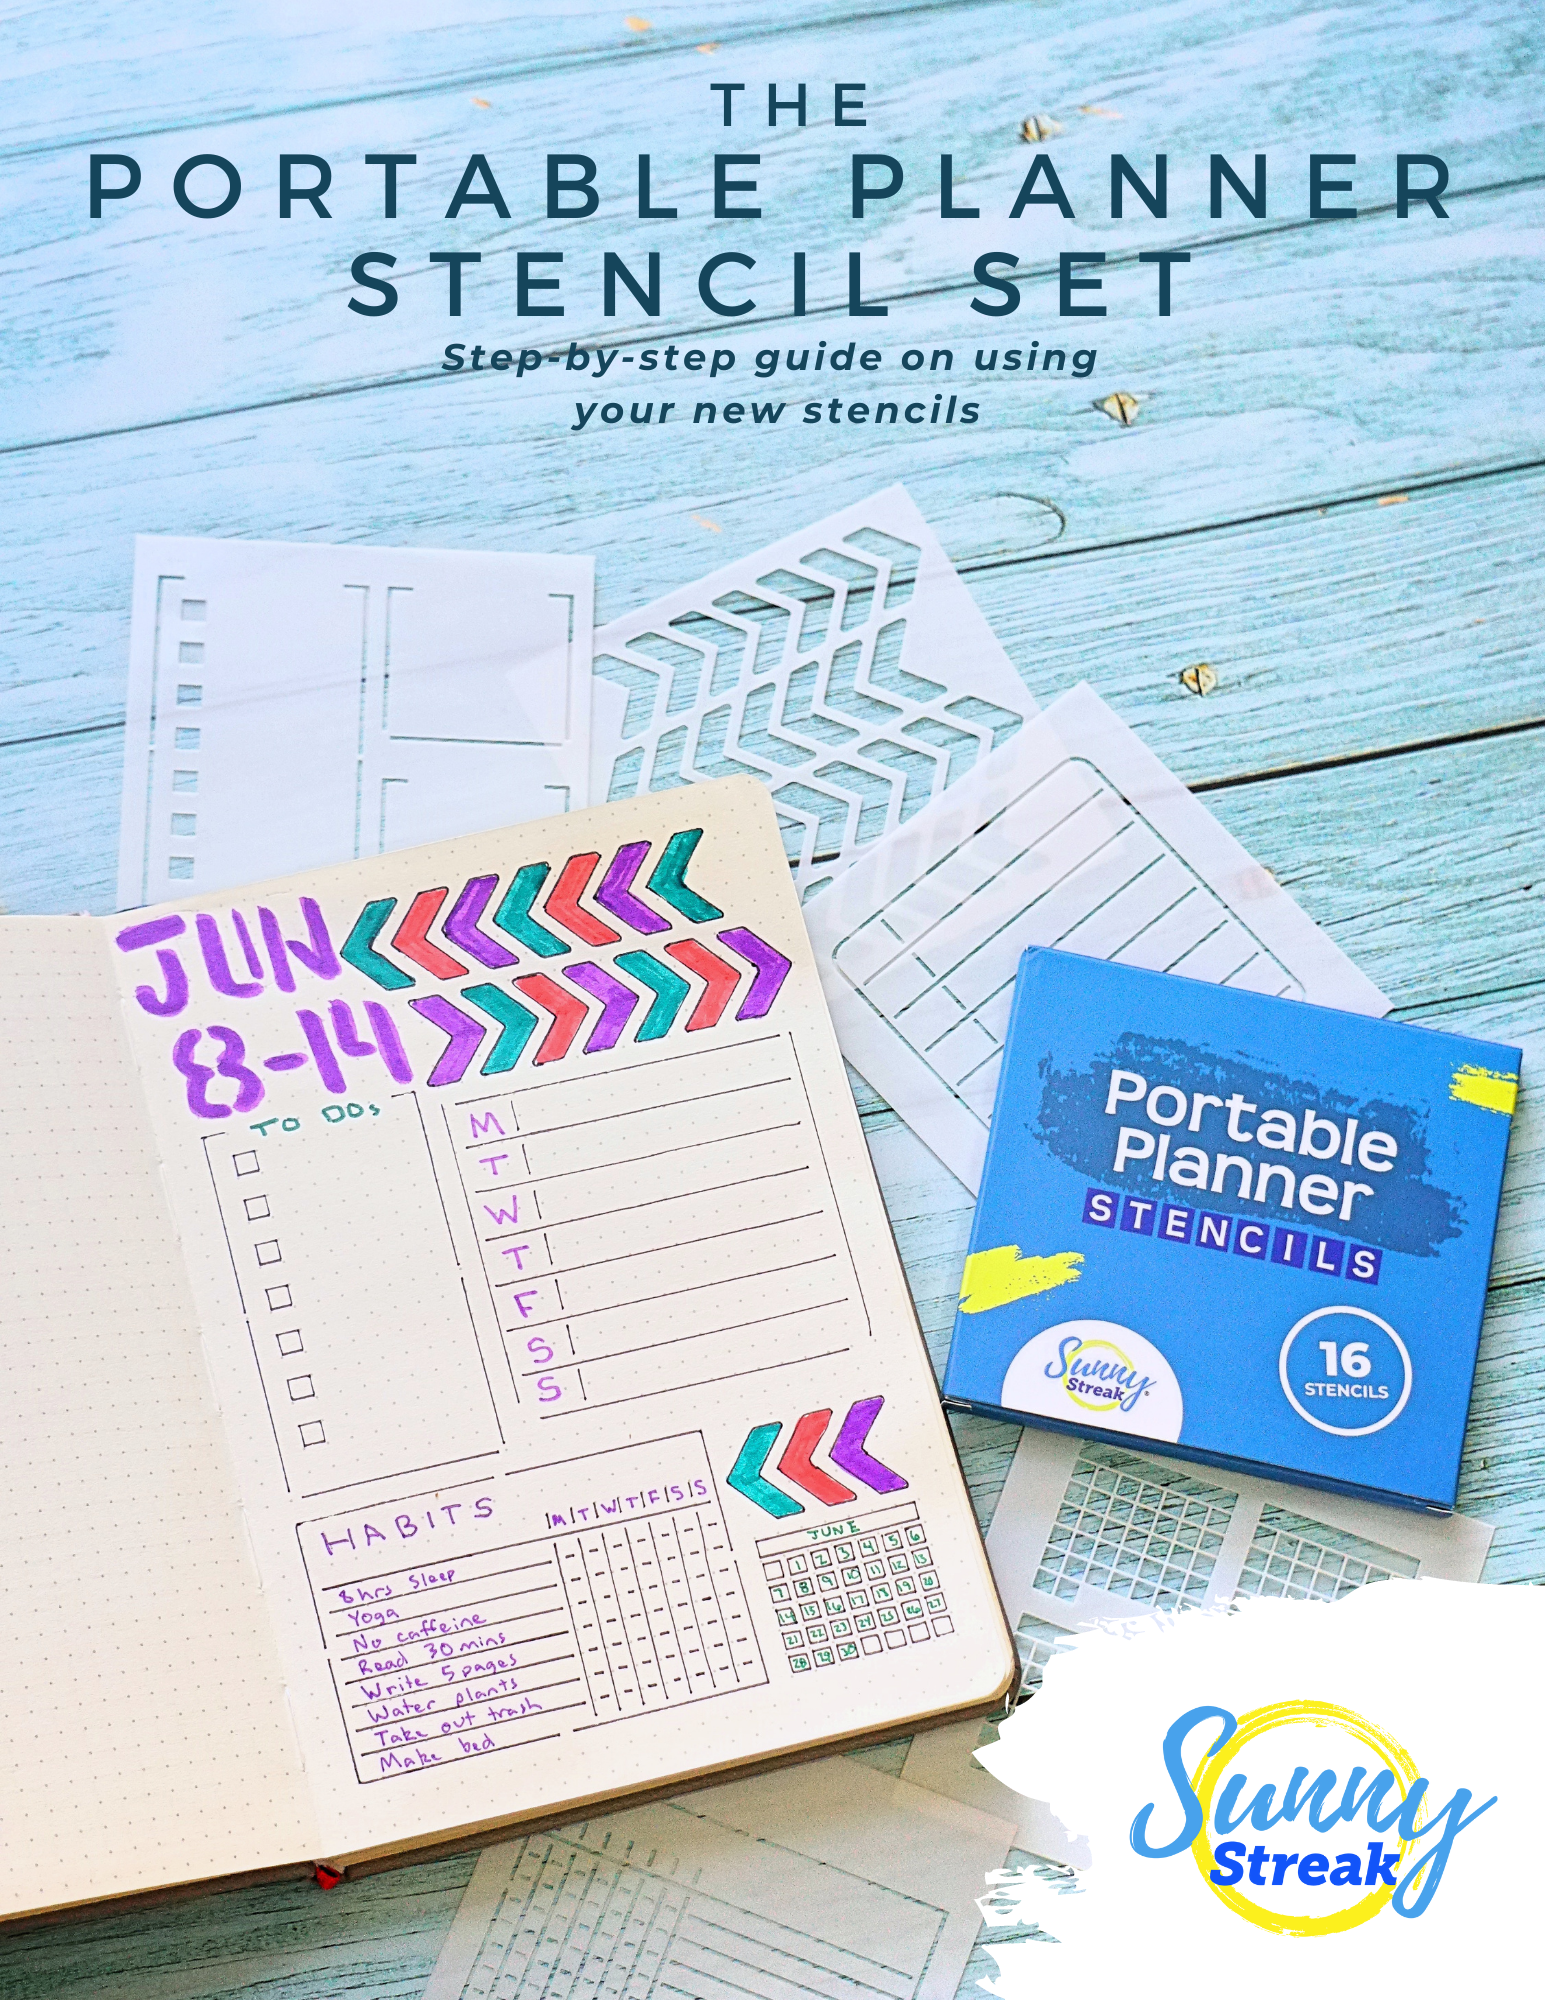 Portable Planner Stencils - x16 Small Square Journal Stencils with Templates for Habit Trackers, Calendars, Checklists, Meal Plans - Journaling